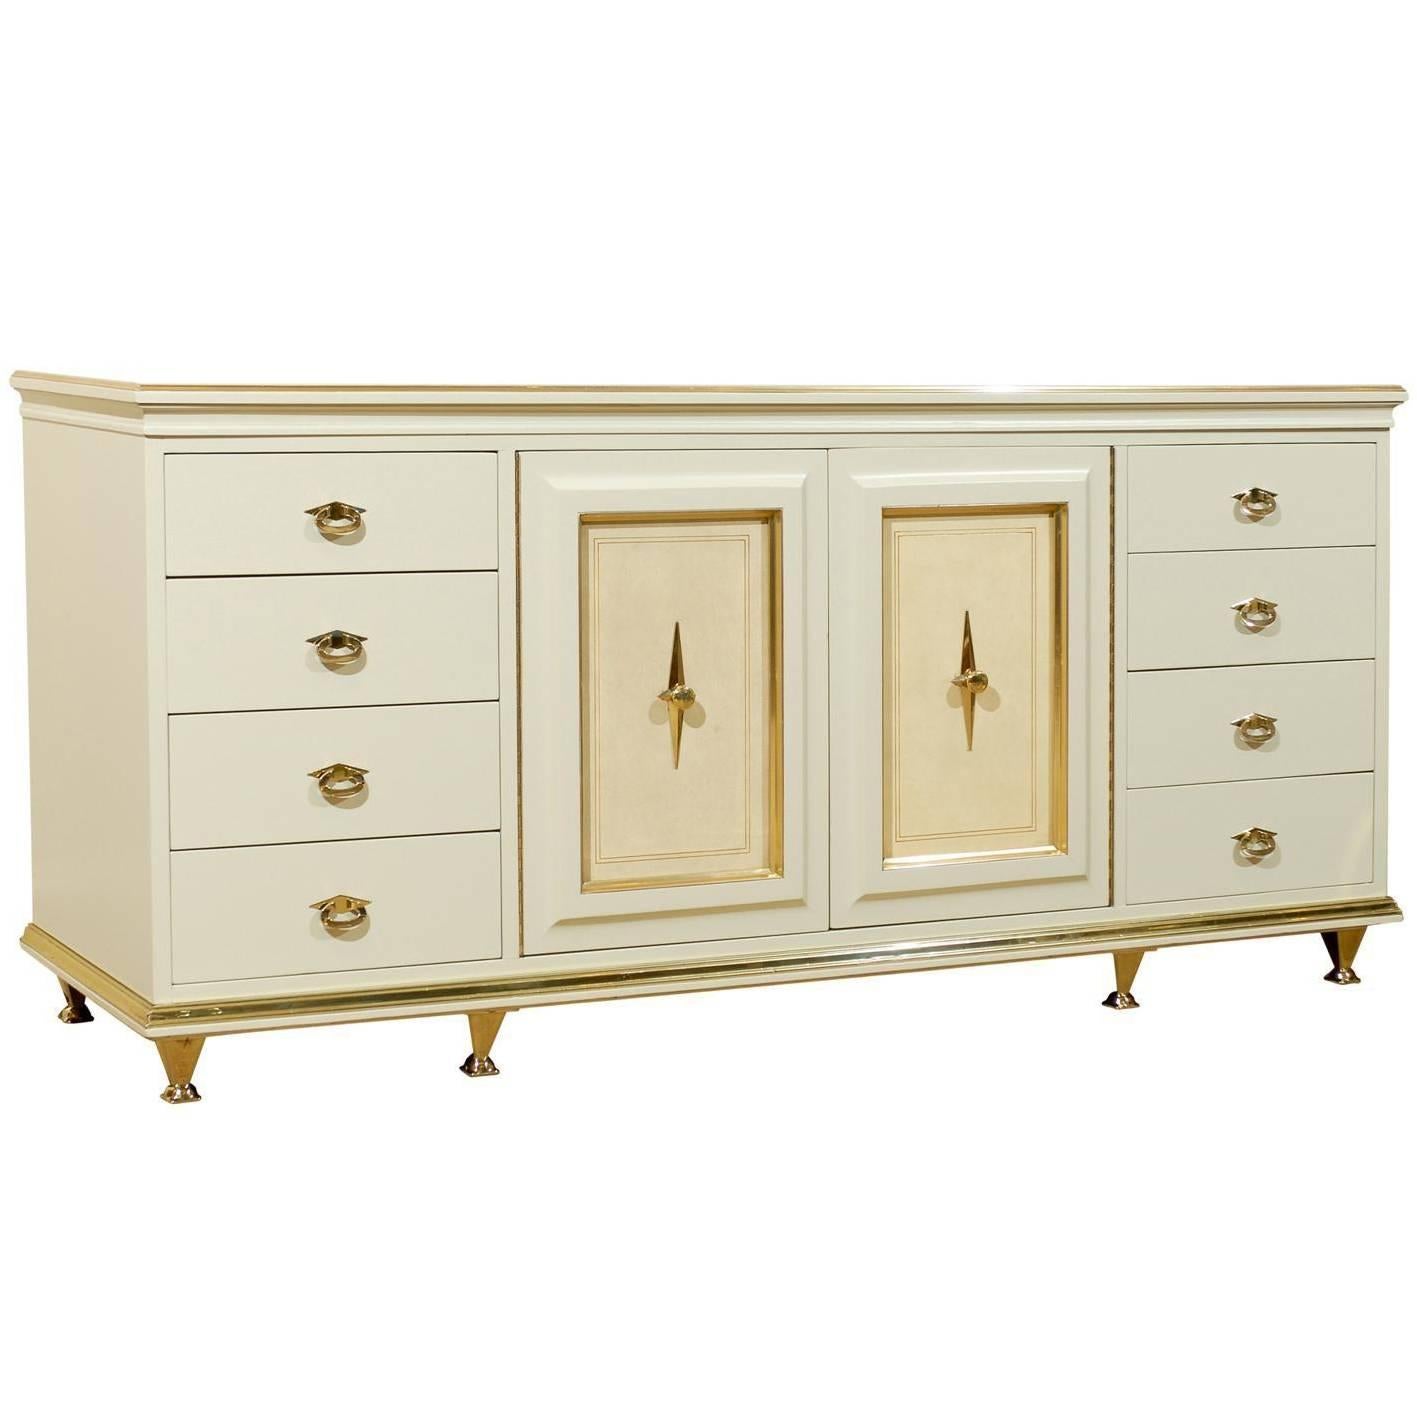 Remarkable Chest or Buffet by American of Martinsville in Cream Lacquer